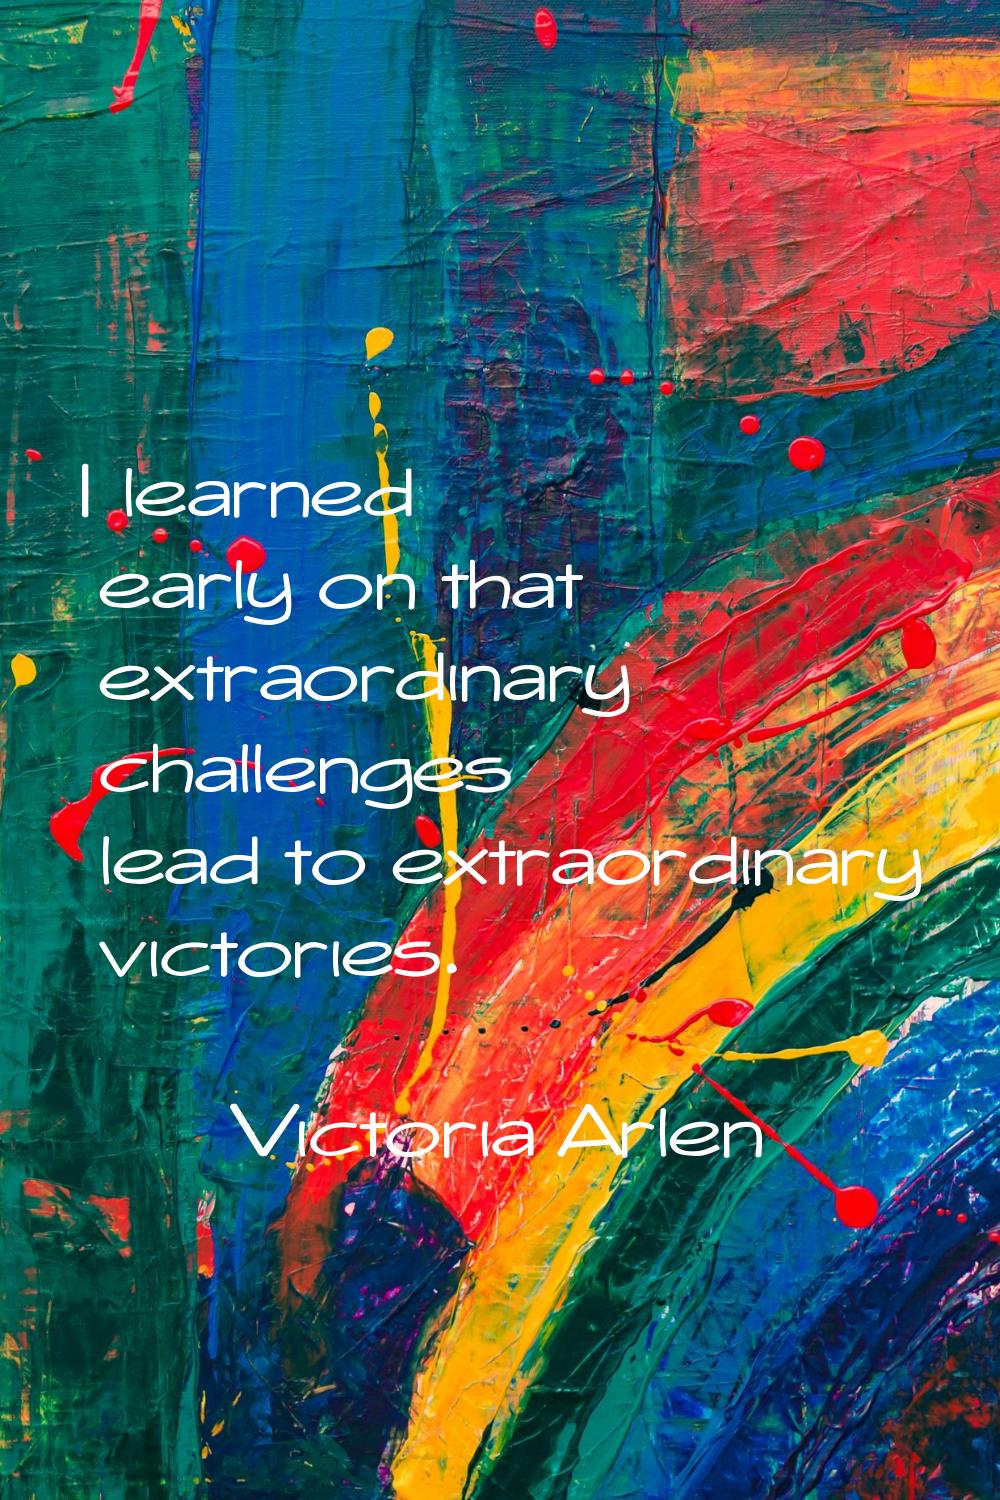 I learned early on that extraordinary challenges lead to extraordinary victories.